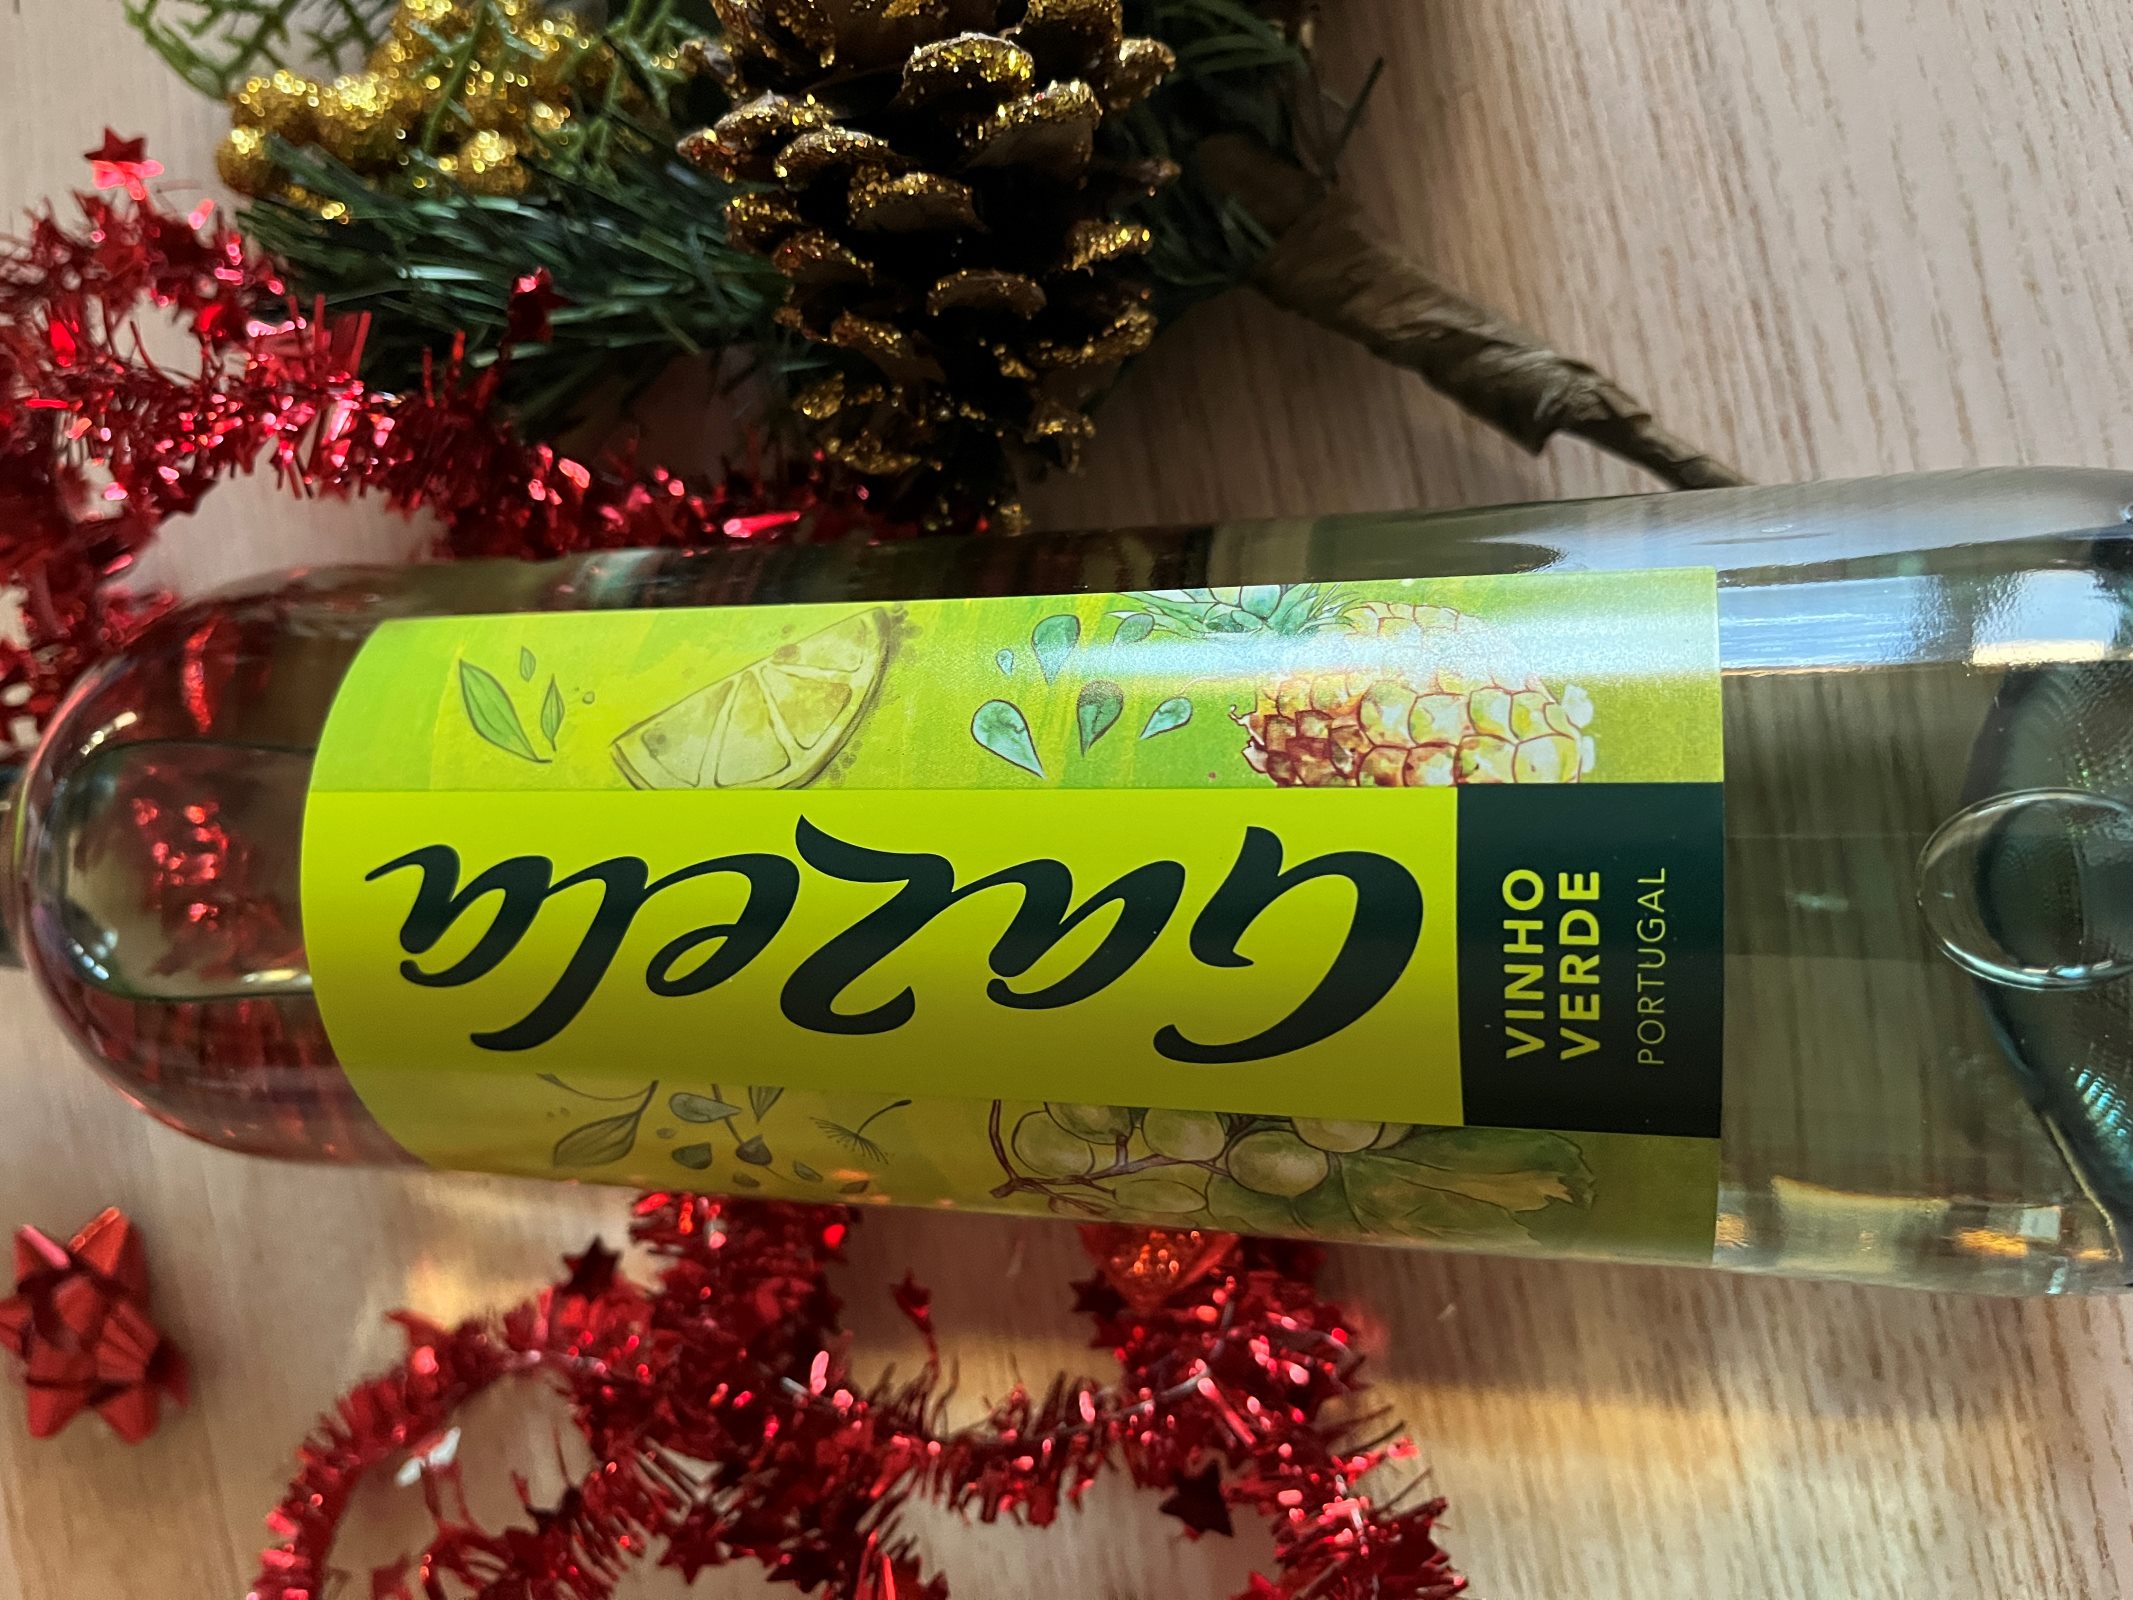 A bottle of Gazela Vinho Verde wine from Portugal lays on a table next to holiday decor